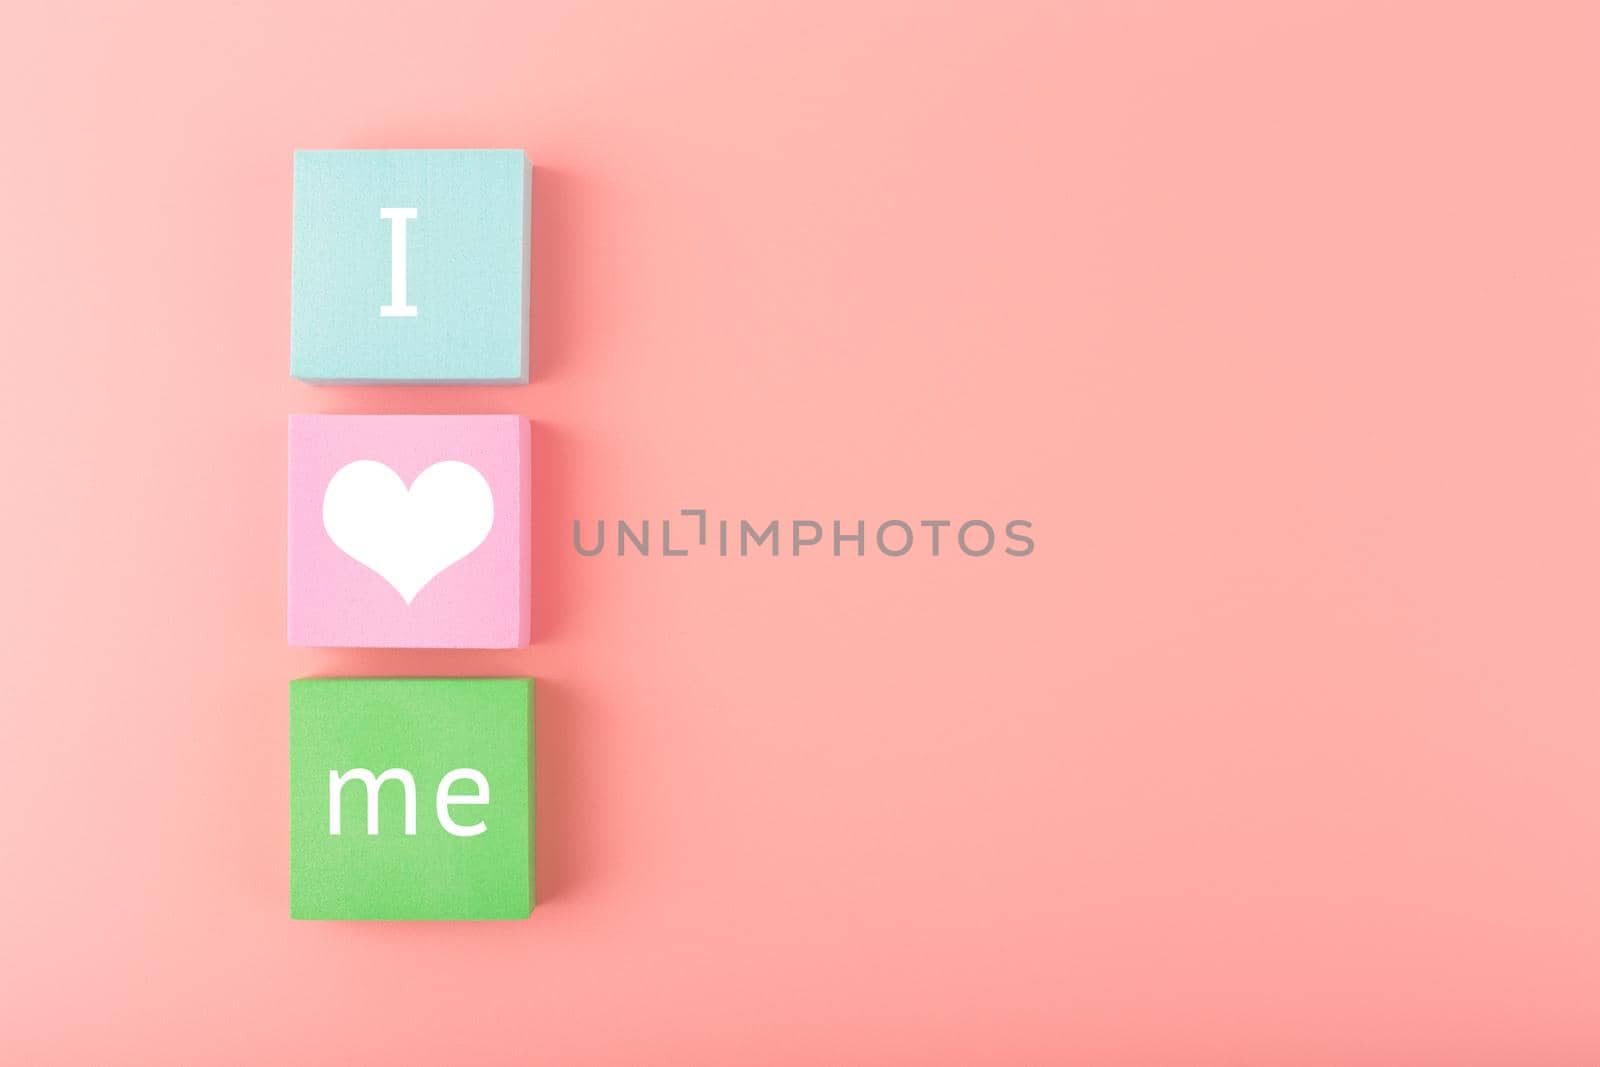 Trendy minimal I love me creative concept of self love and mental health or being single. Multicolored blocks with text against pastel pink background with copy space